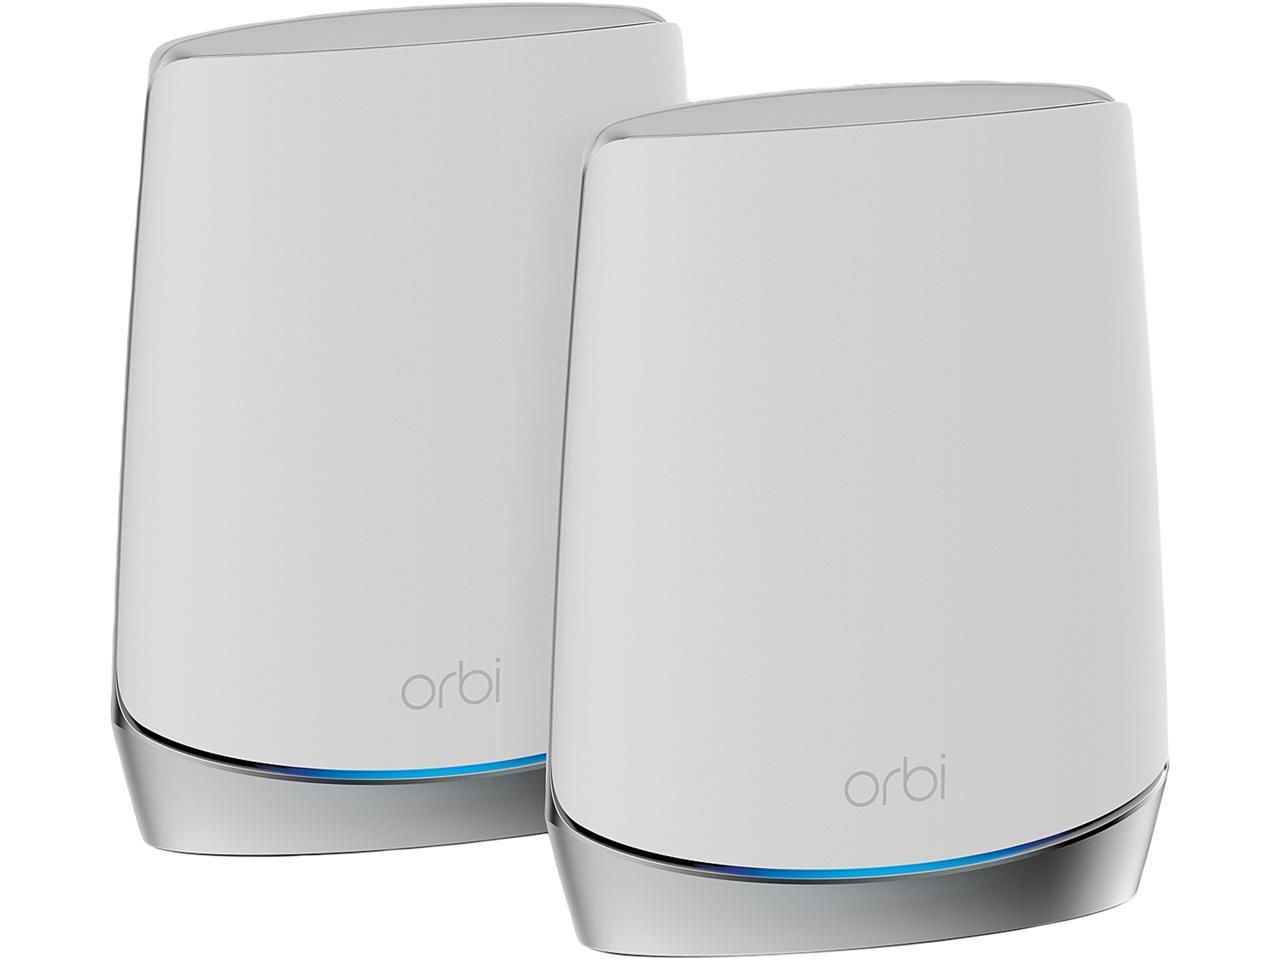 Netgear Orbi RBK752 Whole Home Mesh WiFi Router System for $329.99 Shipped